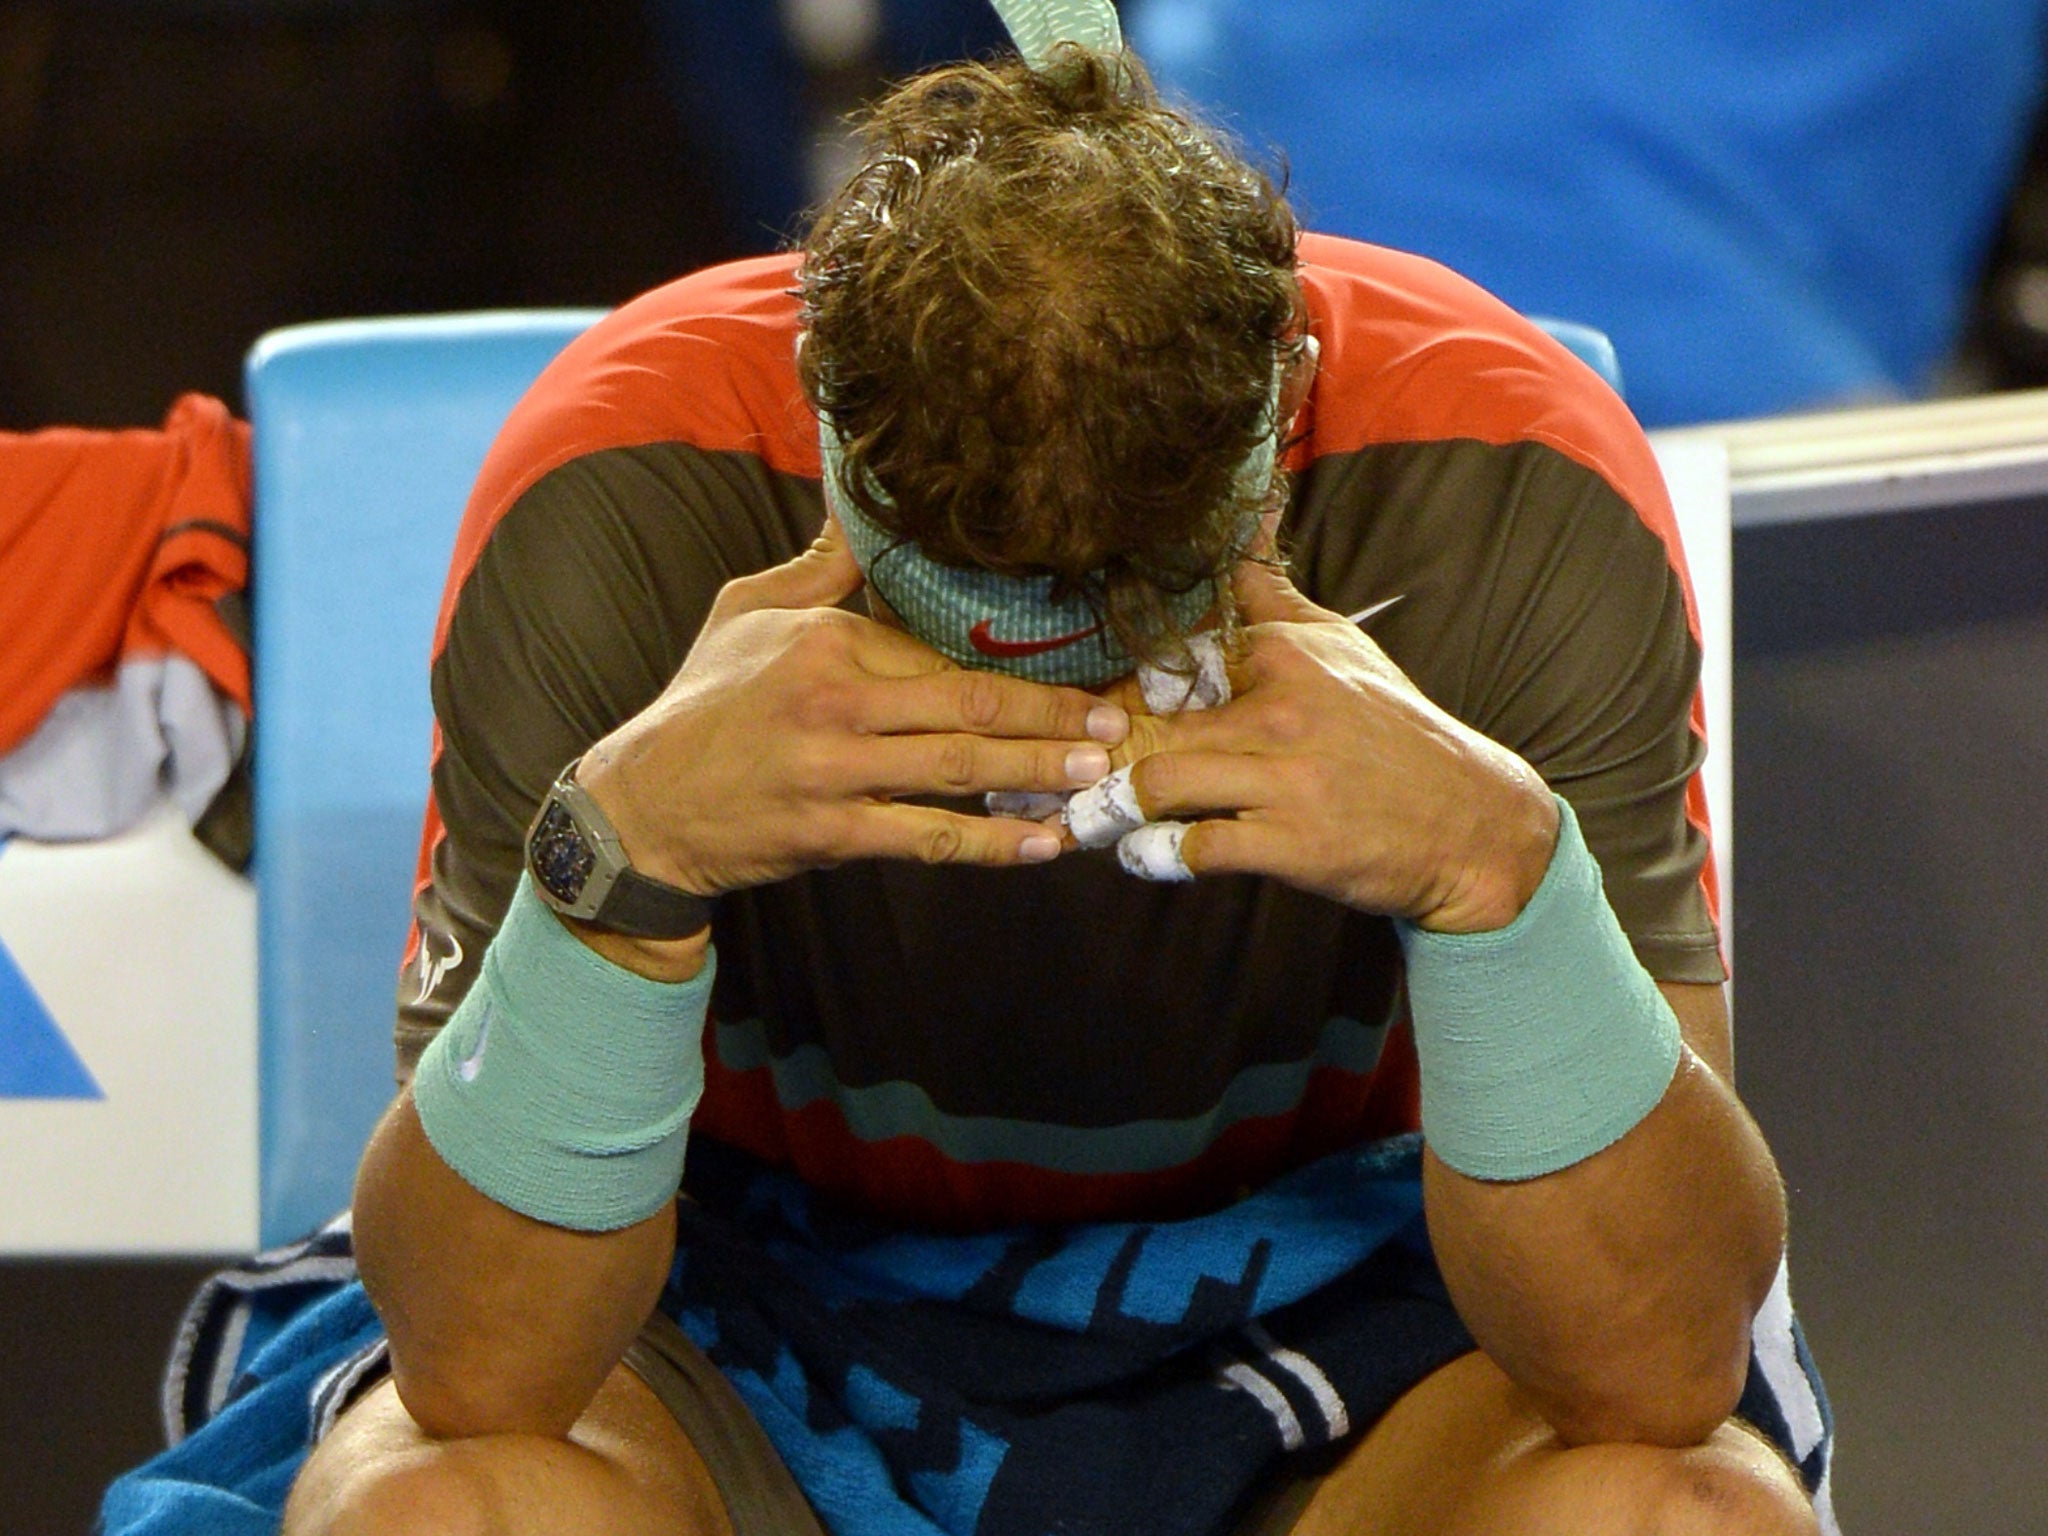 A pained Rafael Nadal reacts between games